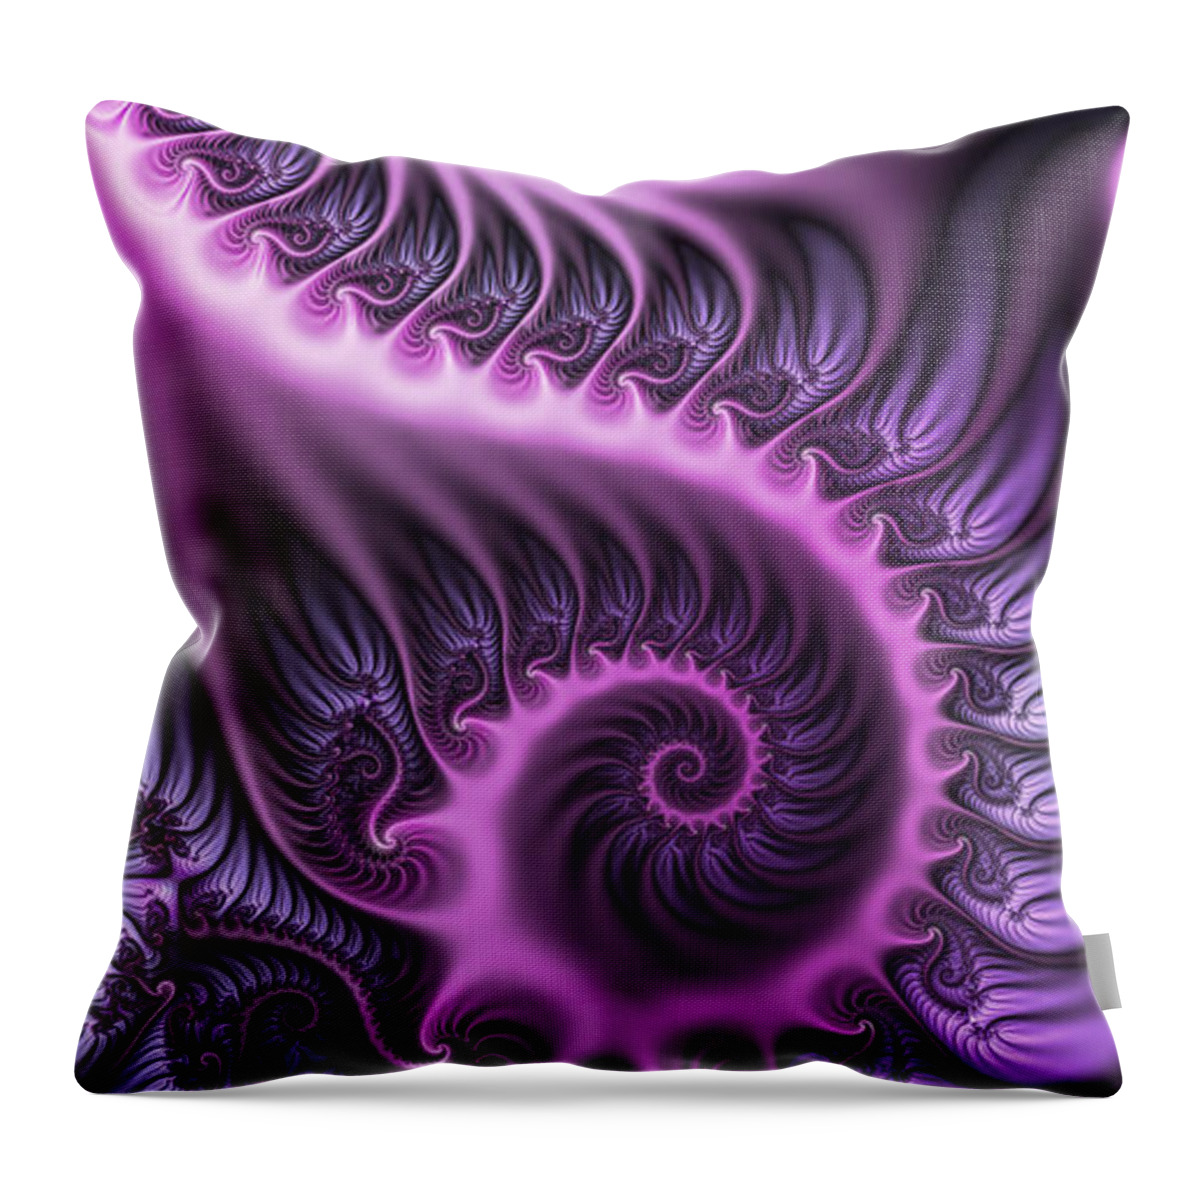 Abstract Throw Pillow featuring the digital art Purple and Friends by Gabiw Art